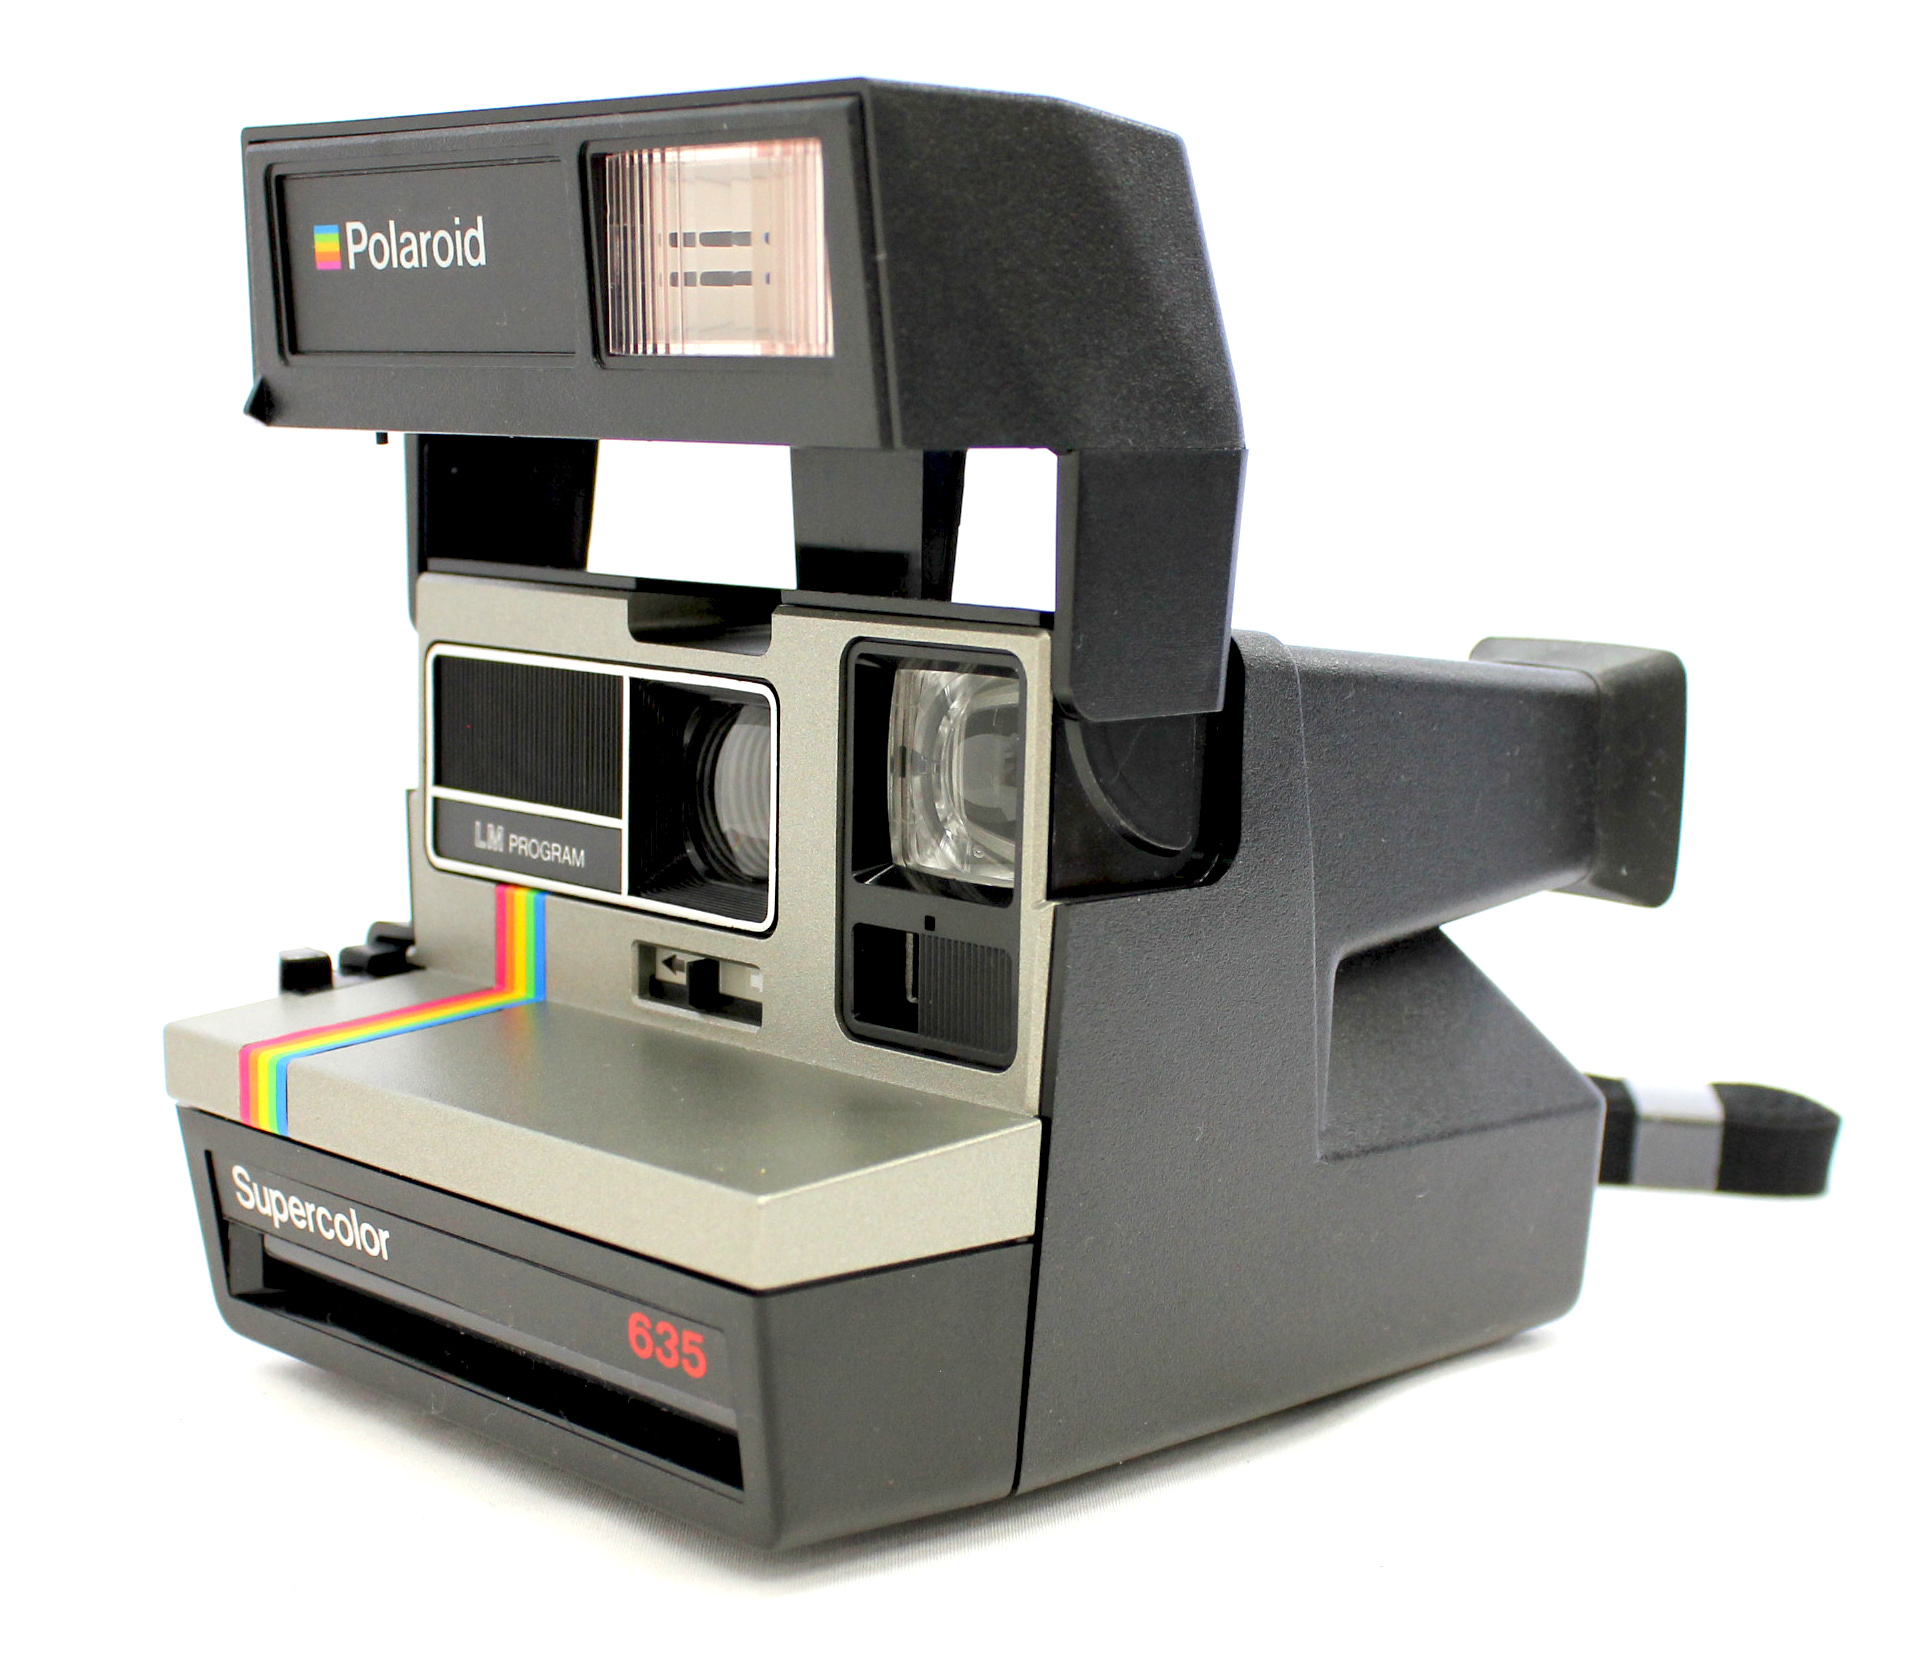  Polaroid Supercolor 635 LM Program (Tested) from Japan Photo 1